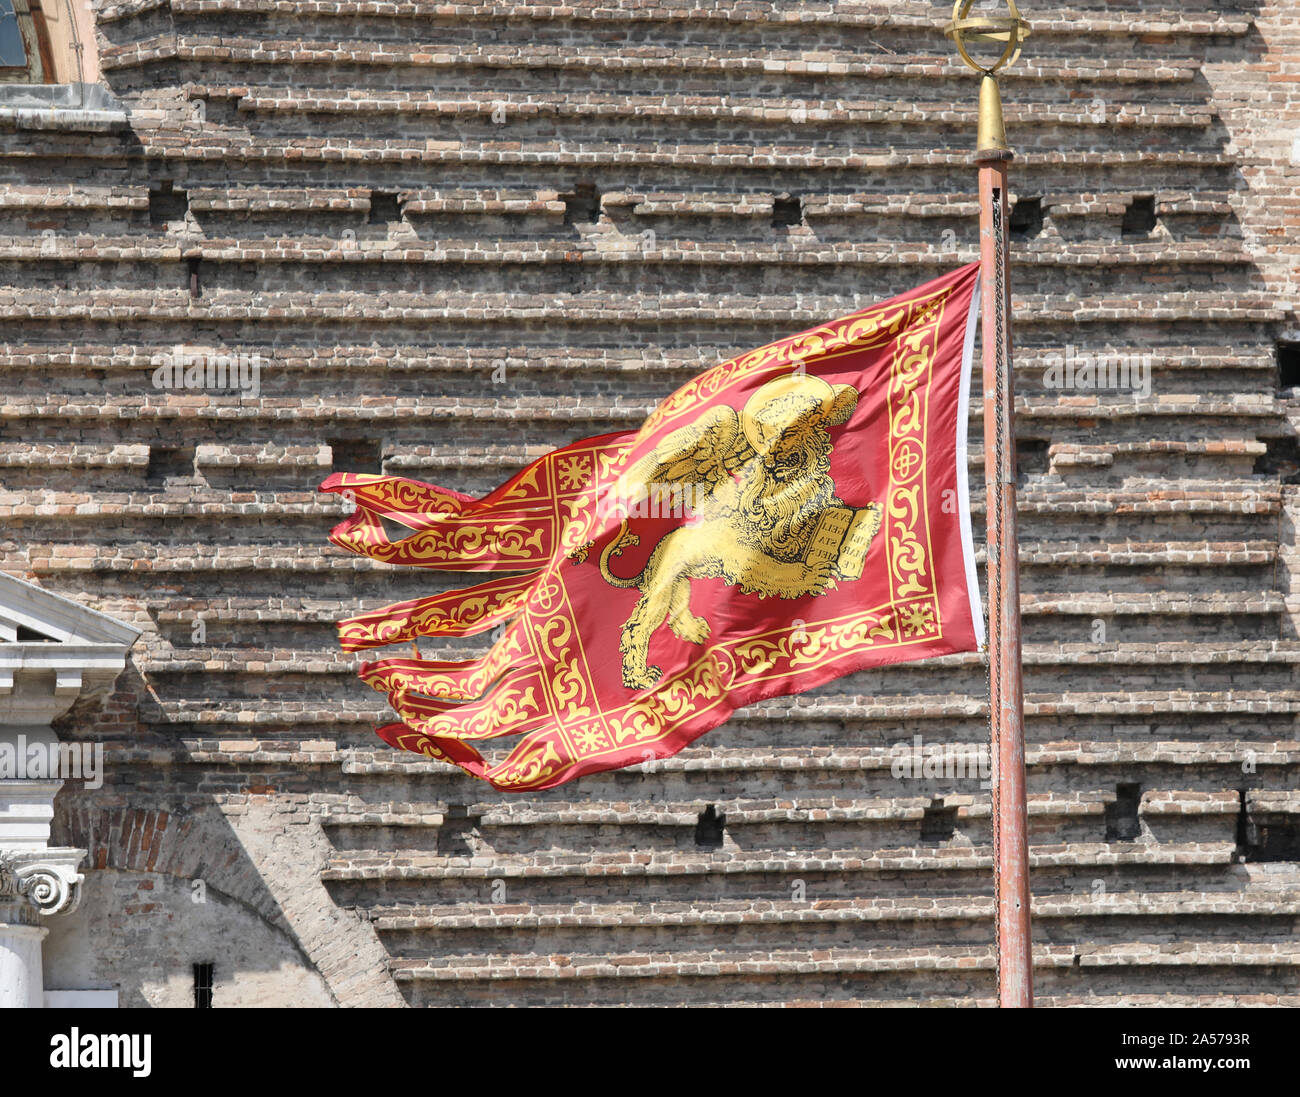 Veneto Region Flag also called Flag of Serenissima Repubblica with winged lion and the wall of bricks in background Stock Photo